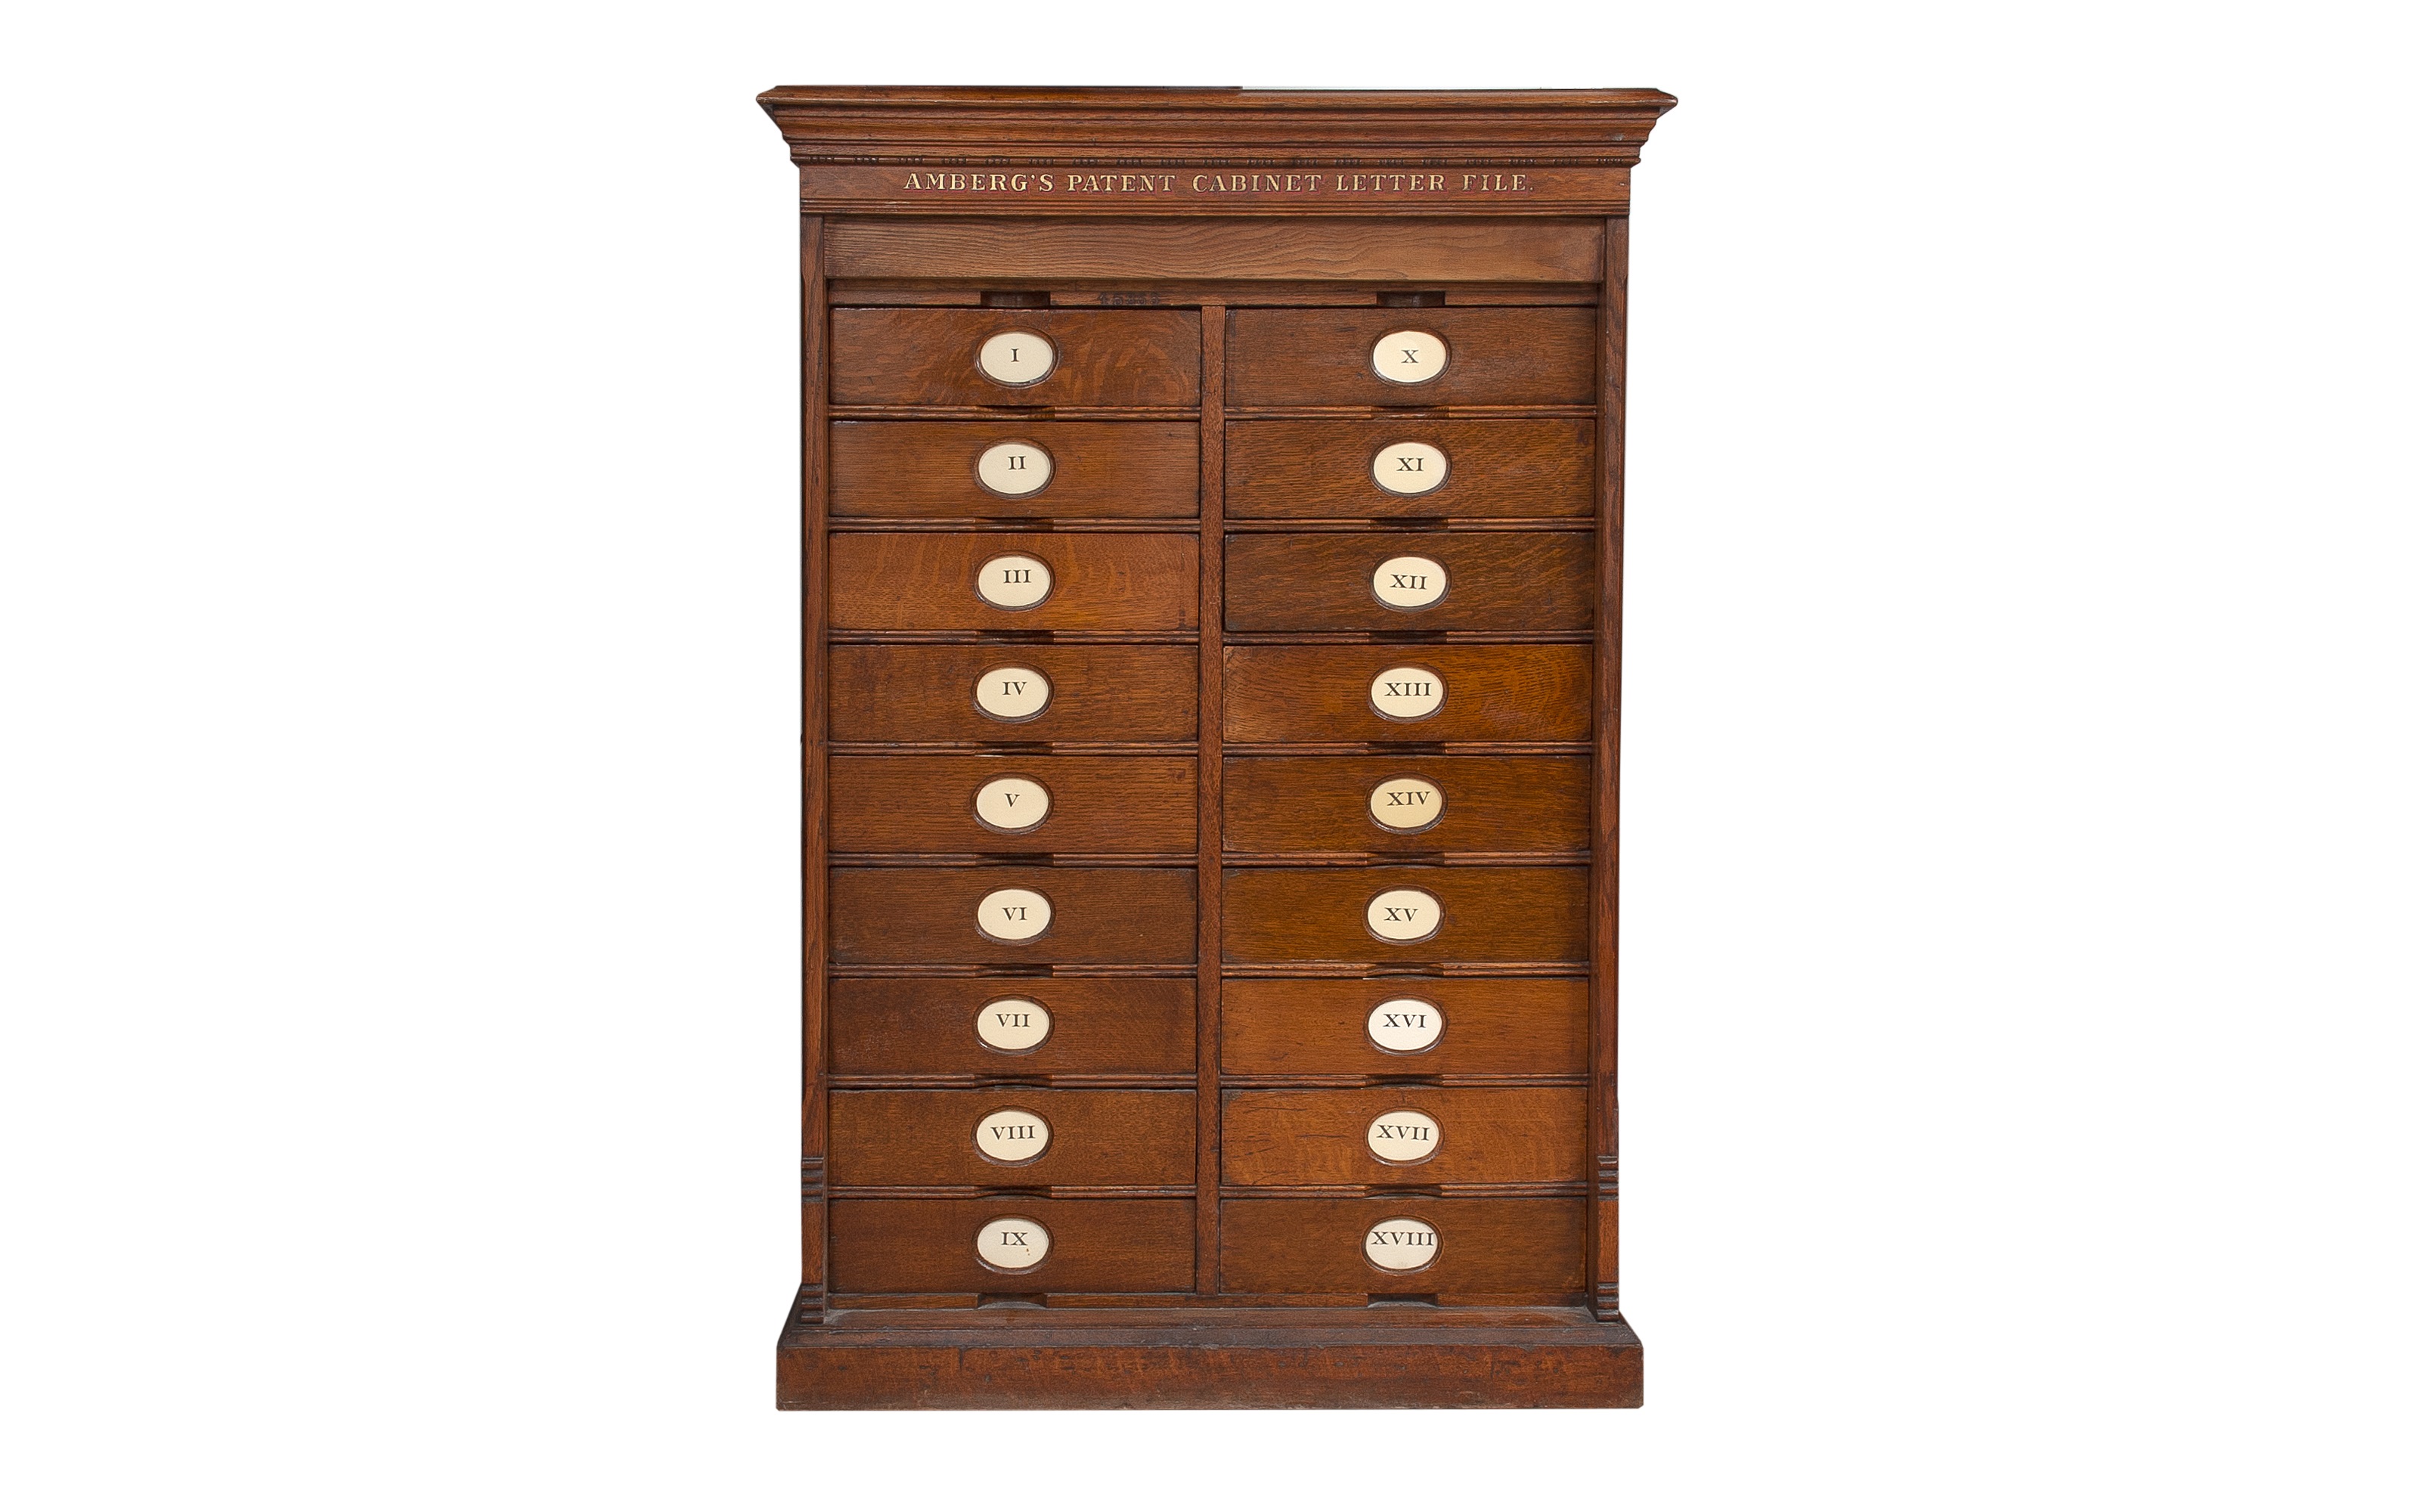 A LATE 19TH CENTURY OAK AMBERG'S PATENT CABINET LETTER FILE, NO. 45869